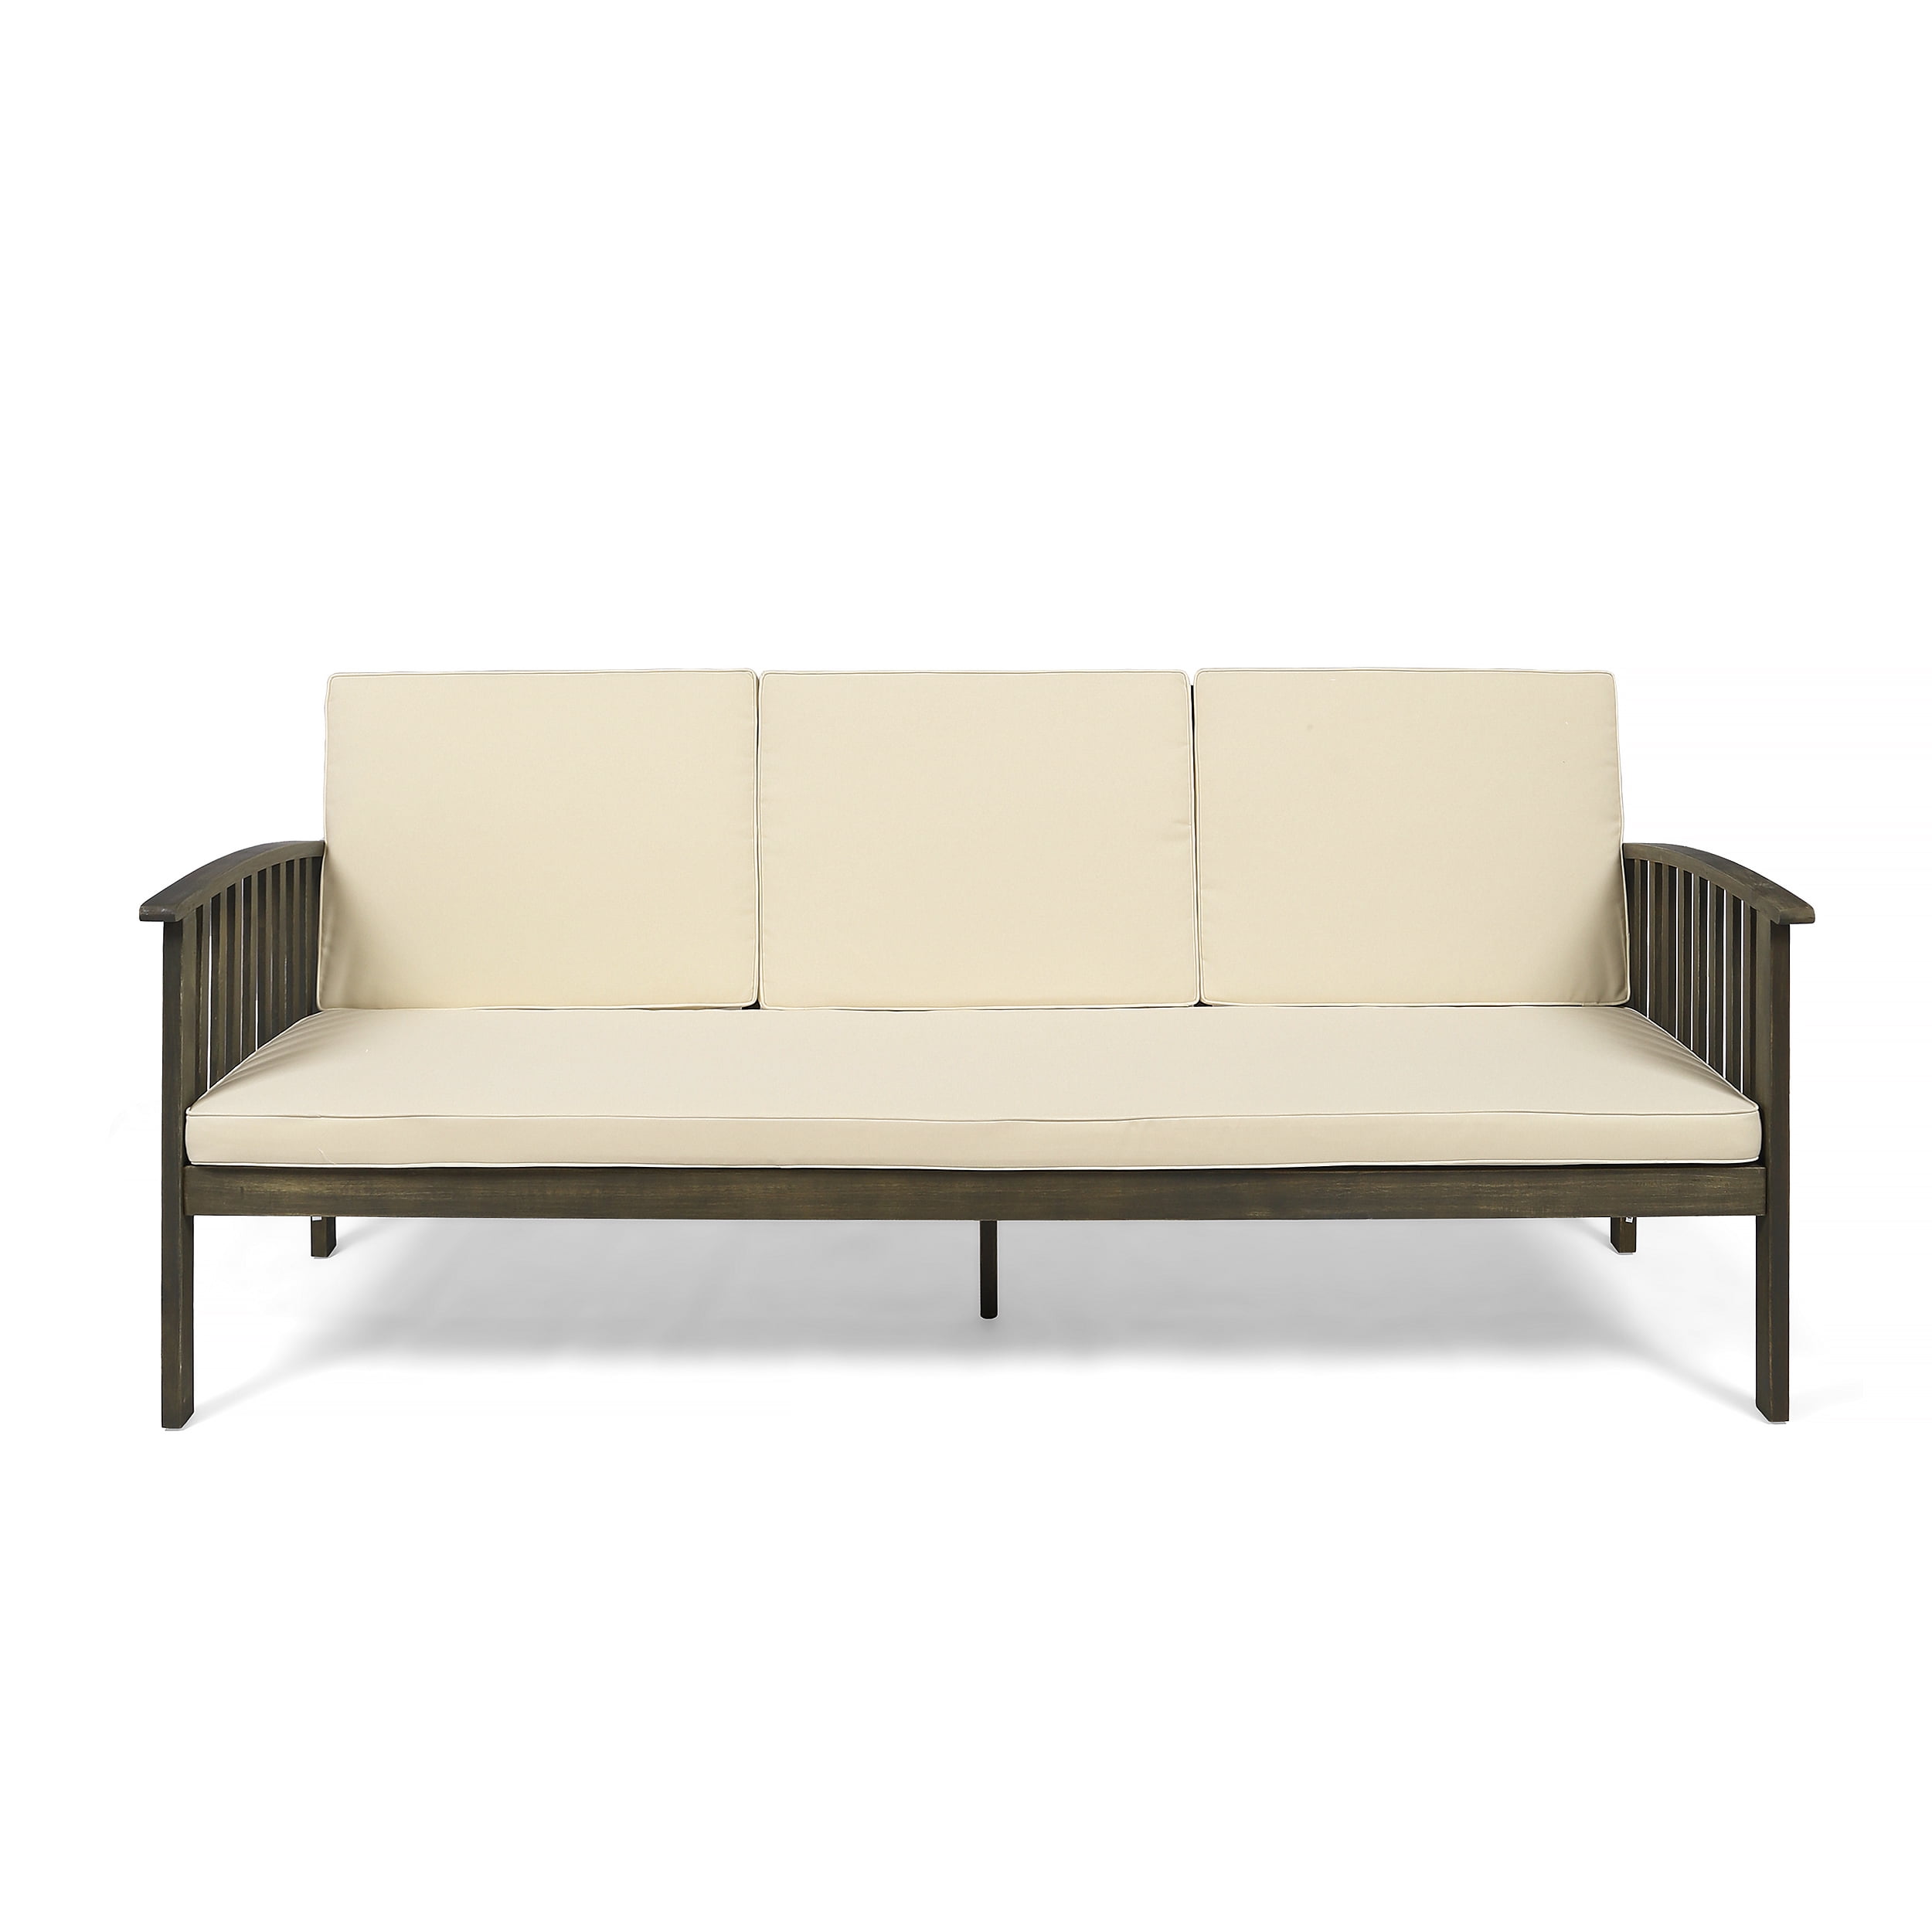 Noble House Brendon Outdoor Acacia Wood Sofa with Cushions